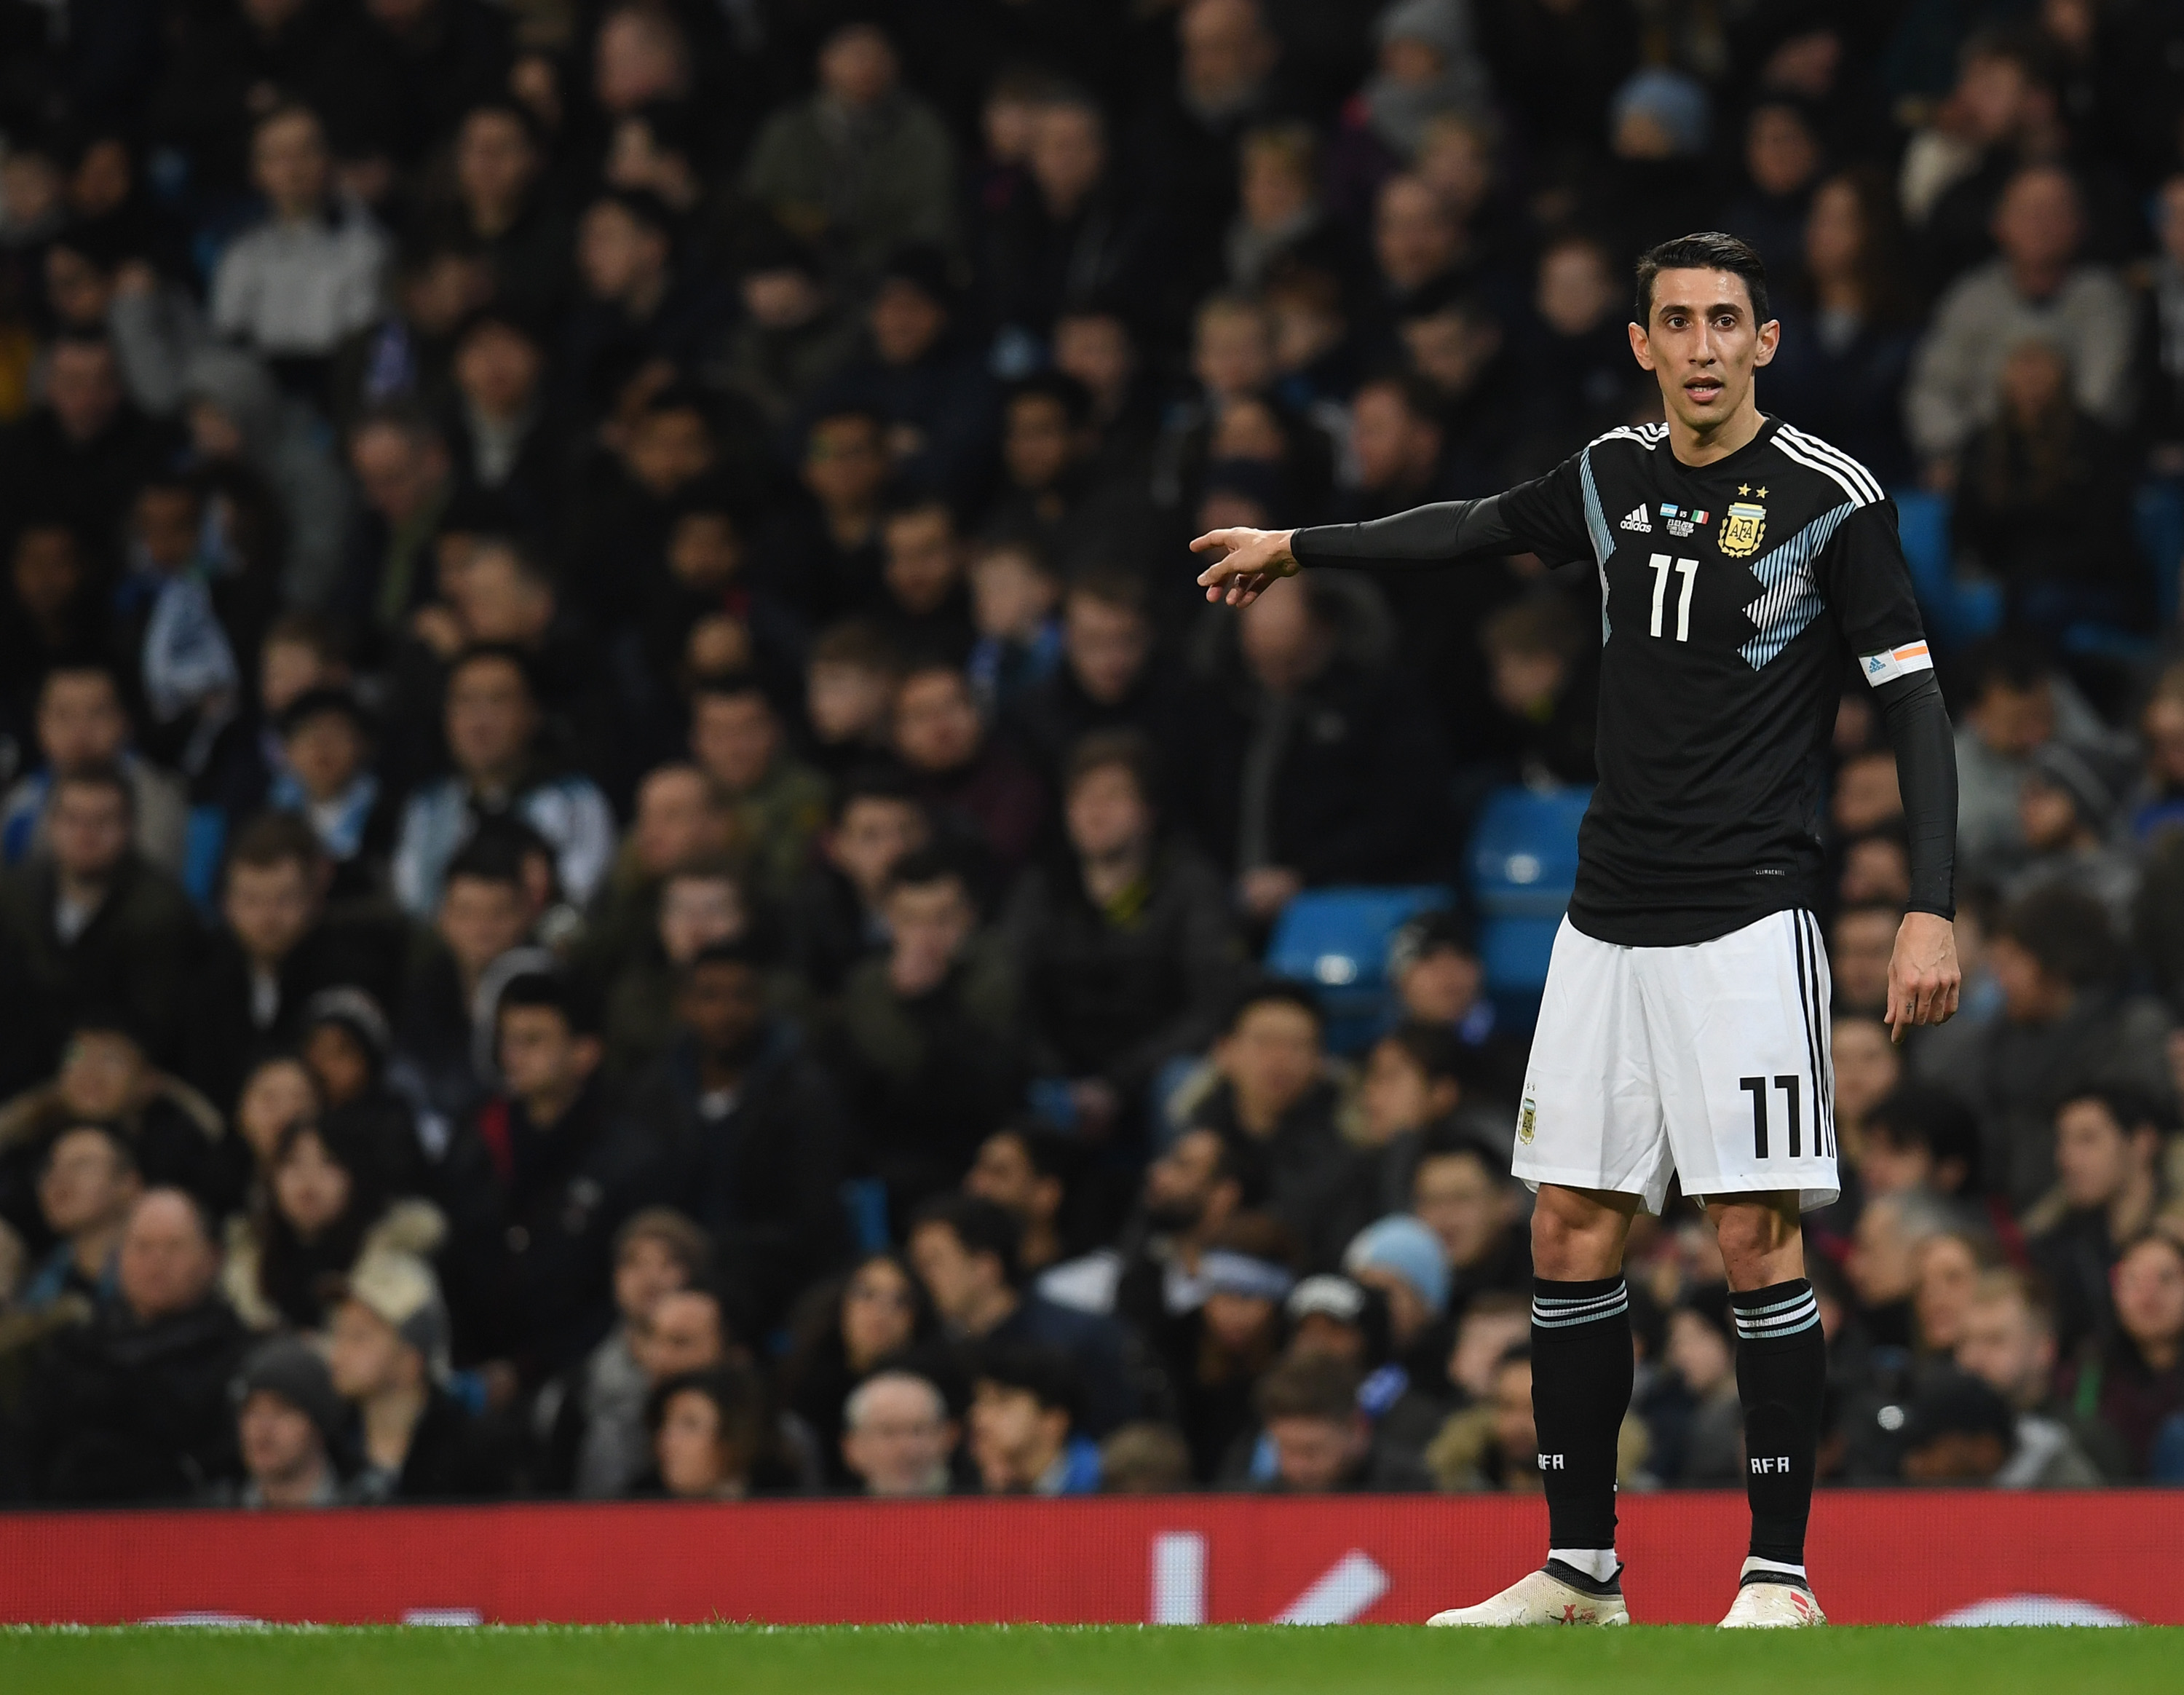 Di Maria was influential for Argentina (Photo by Claudio Villa/Getty Images)